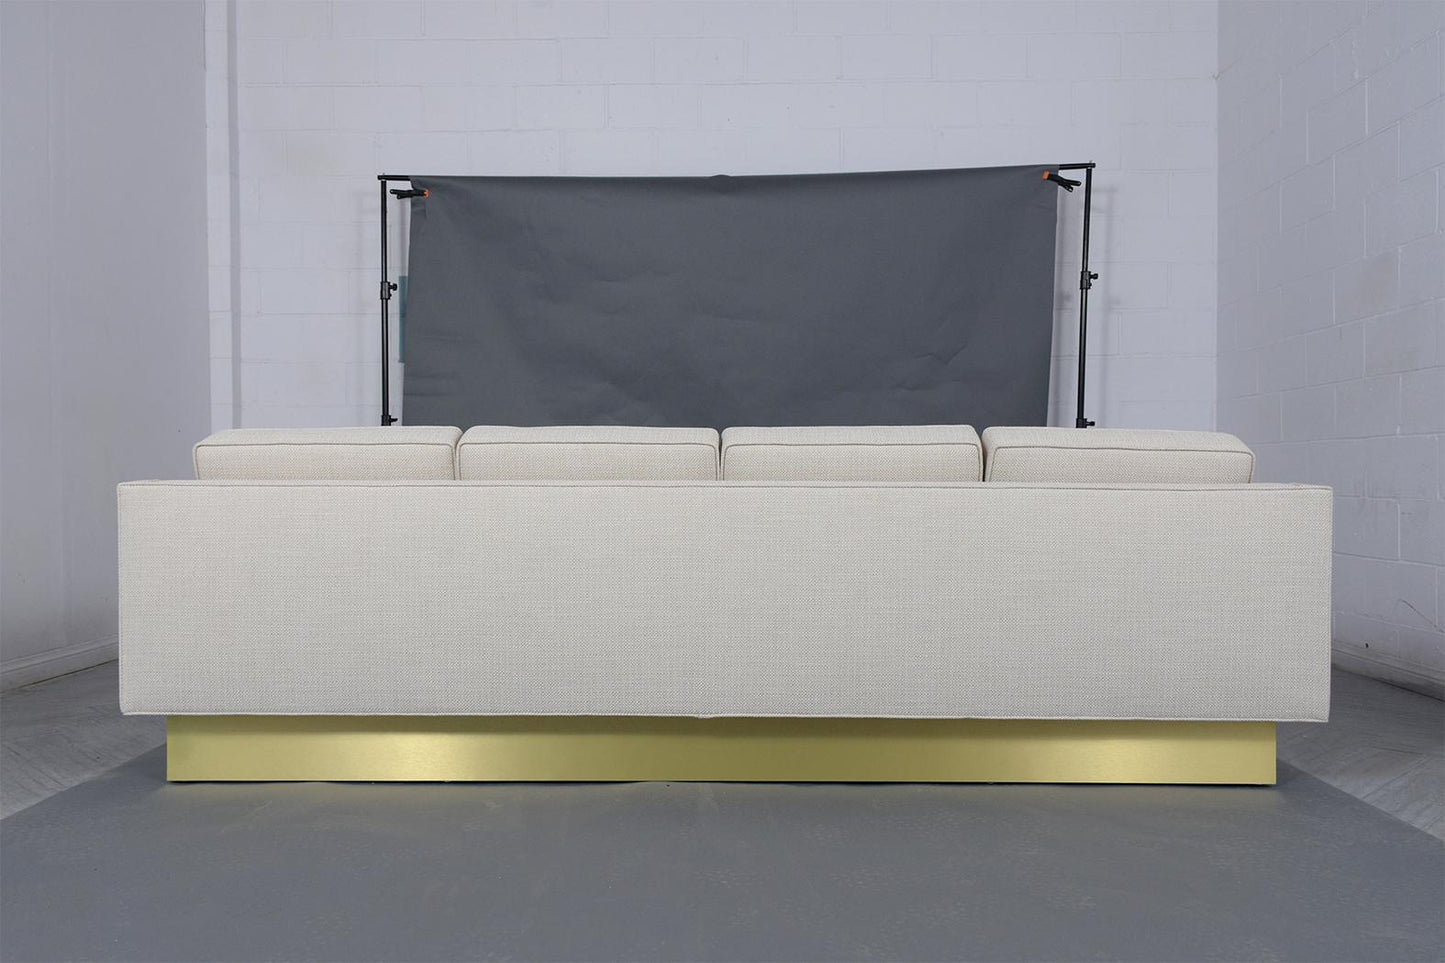 Restored Vintage Mid-Century Modern Executive Sofa in Off-White Fabric